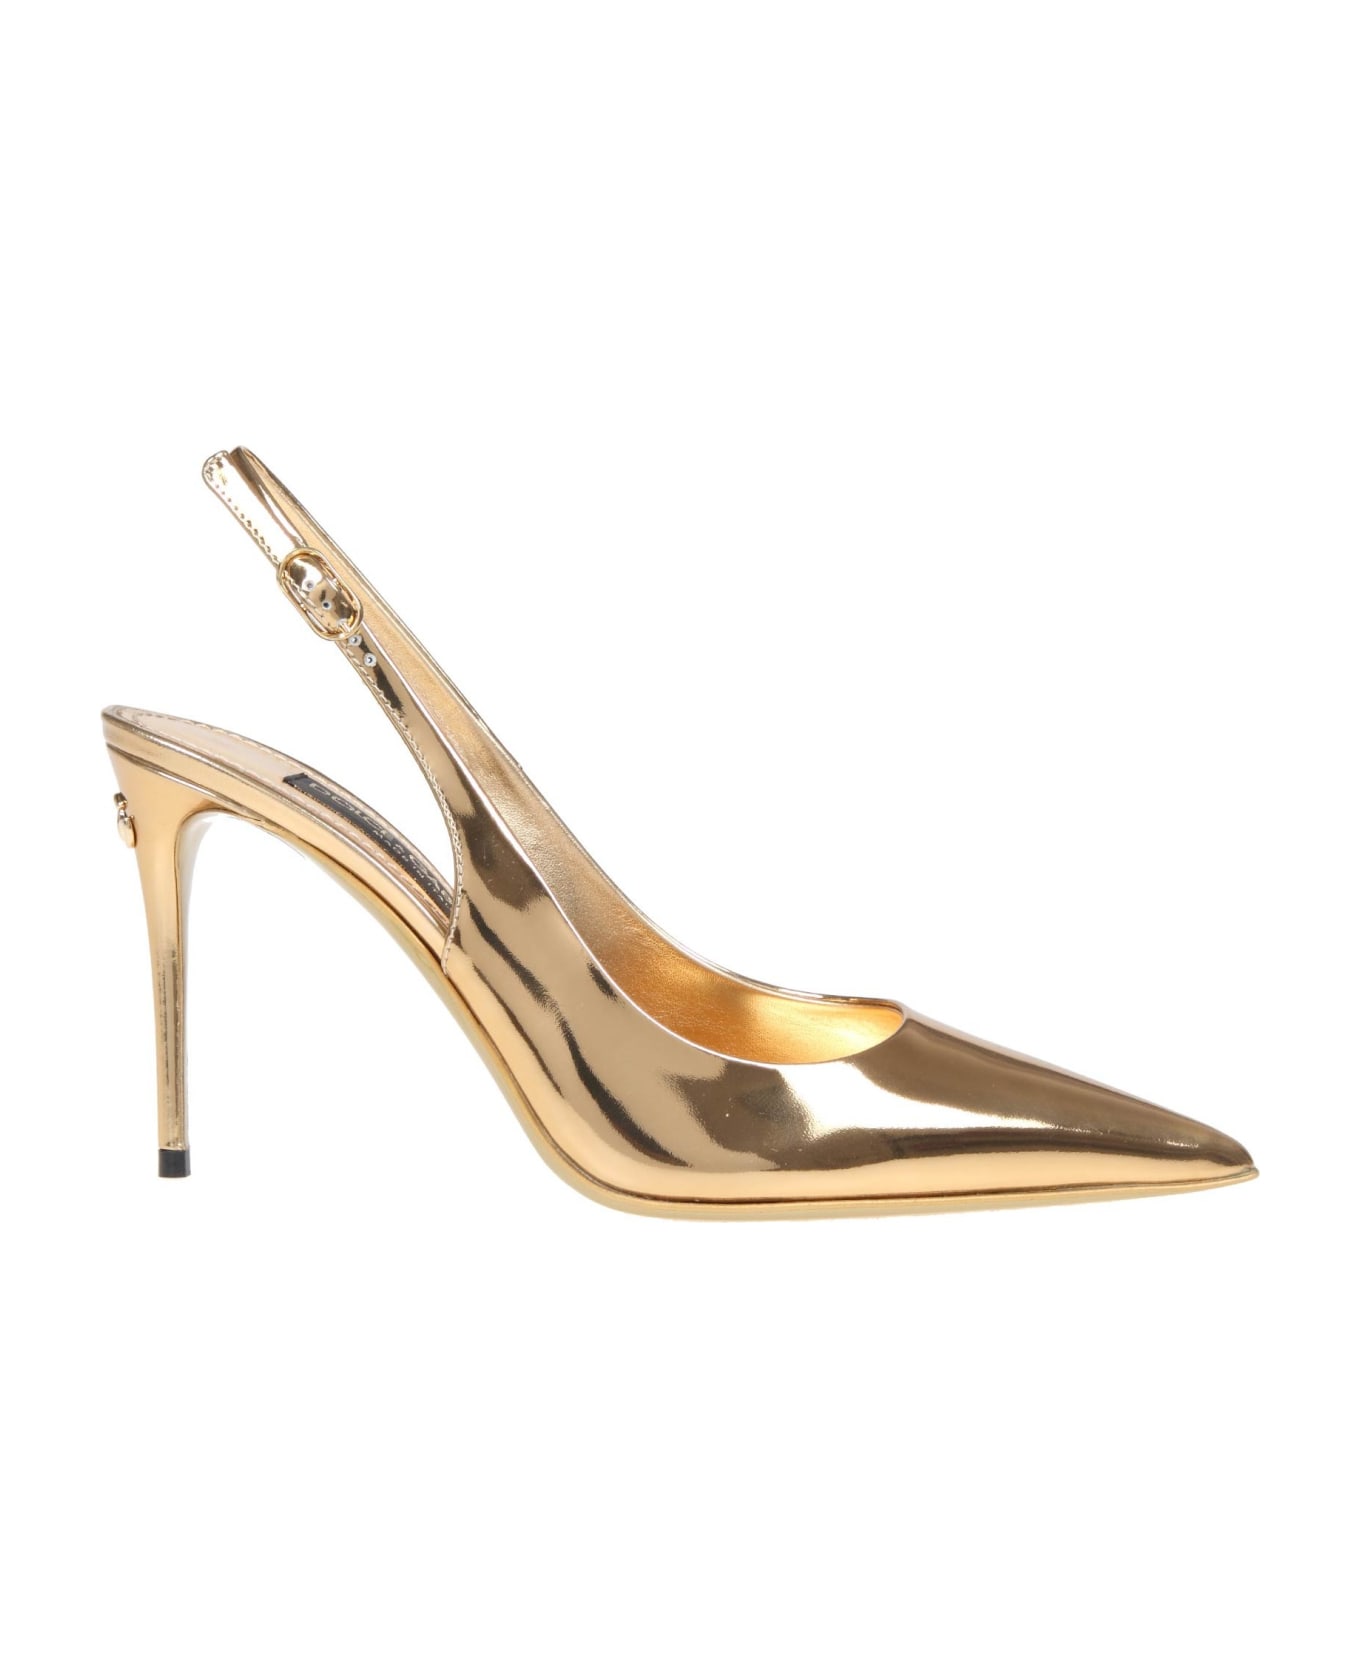 Dolce & Gabbana Slingback In Gold Mirror Leather - Light gold